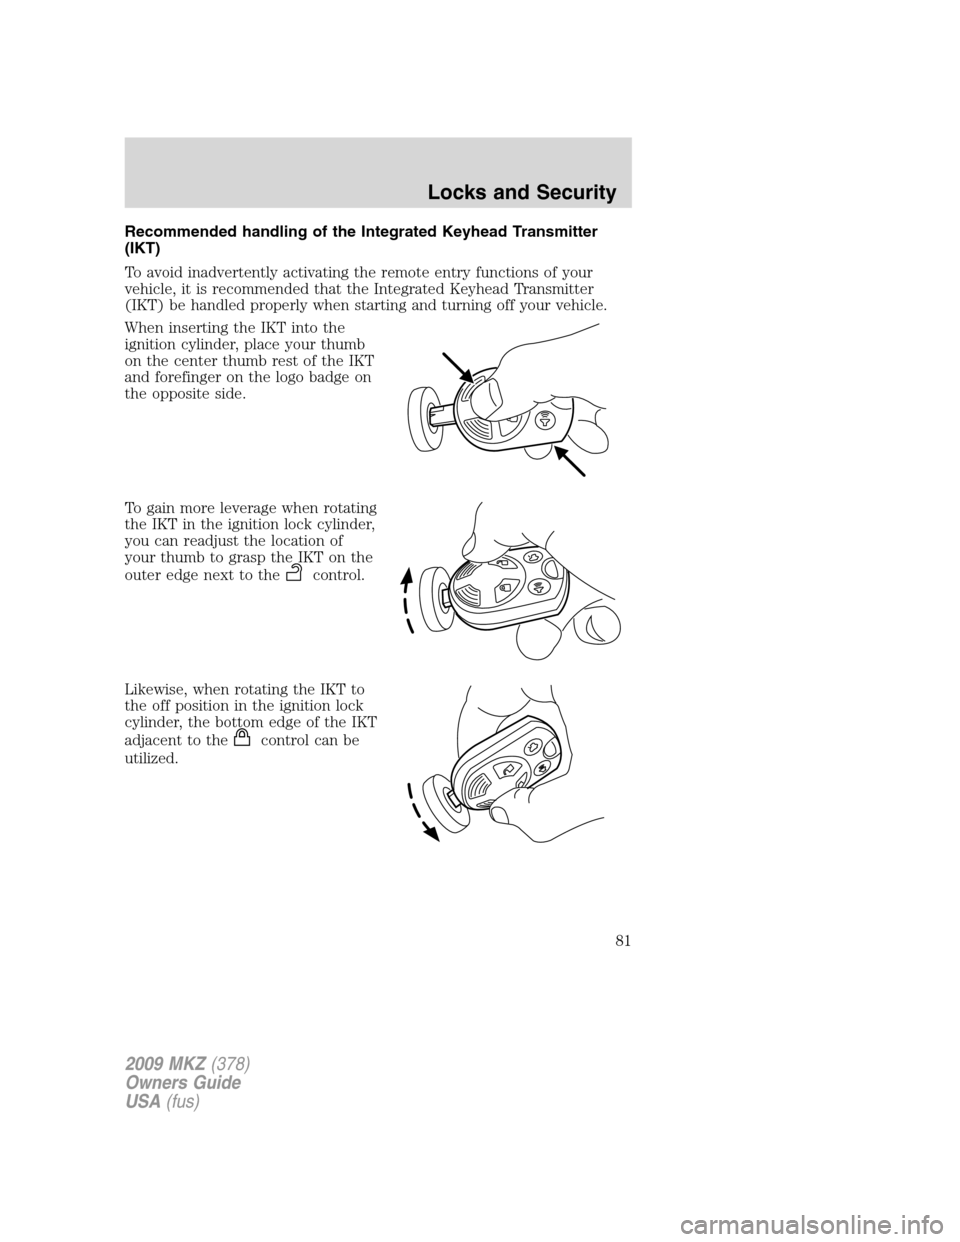 LINCOLN MKZ 2009  Owners Manual Recommended handling of the Integrated Keyhead Transmitter
(IKT)
To avoid inadvertently activating the remote entry functions of your
vehicle, it is recommended that the Integrated Keyhead Transmitter